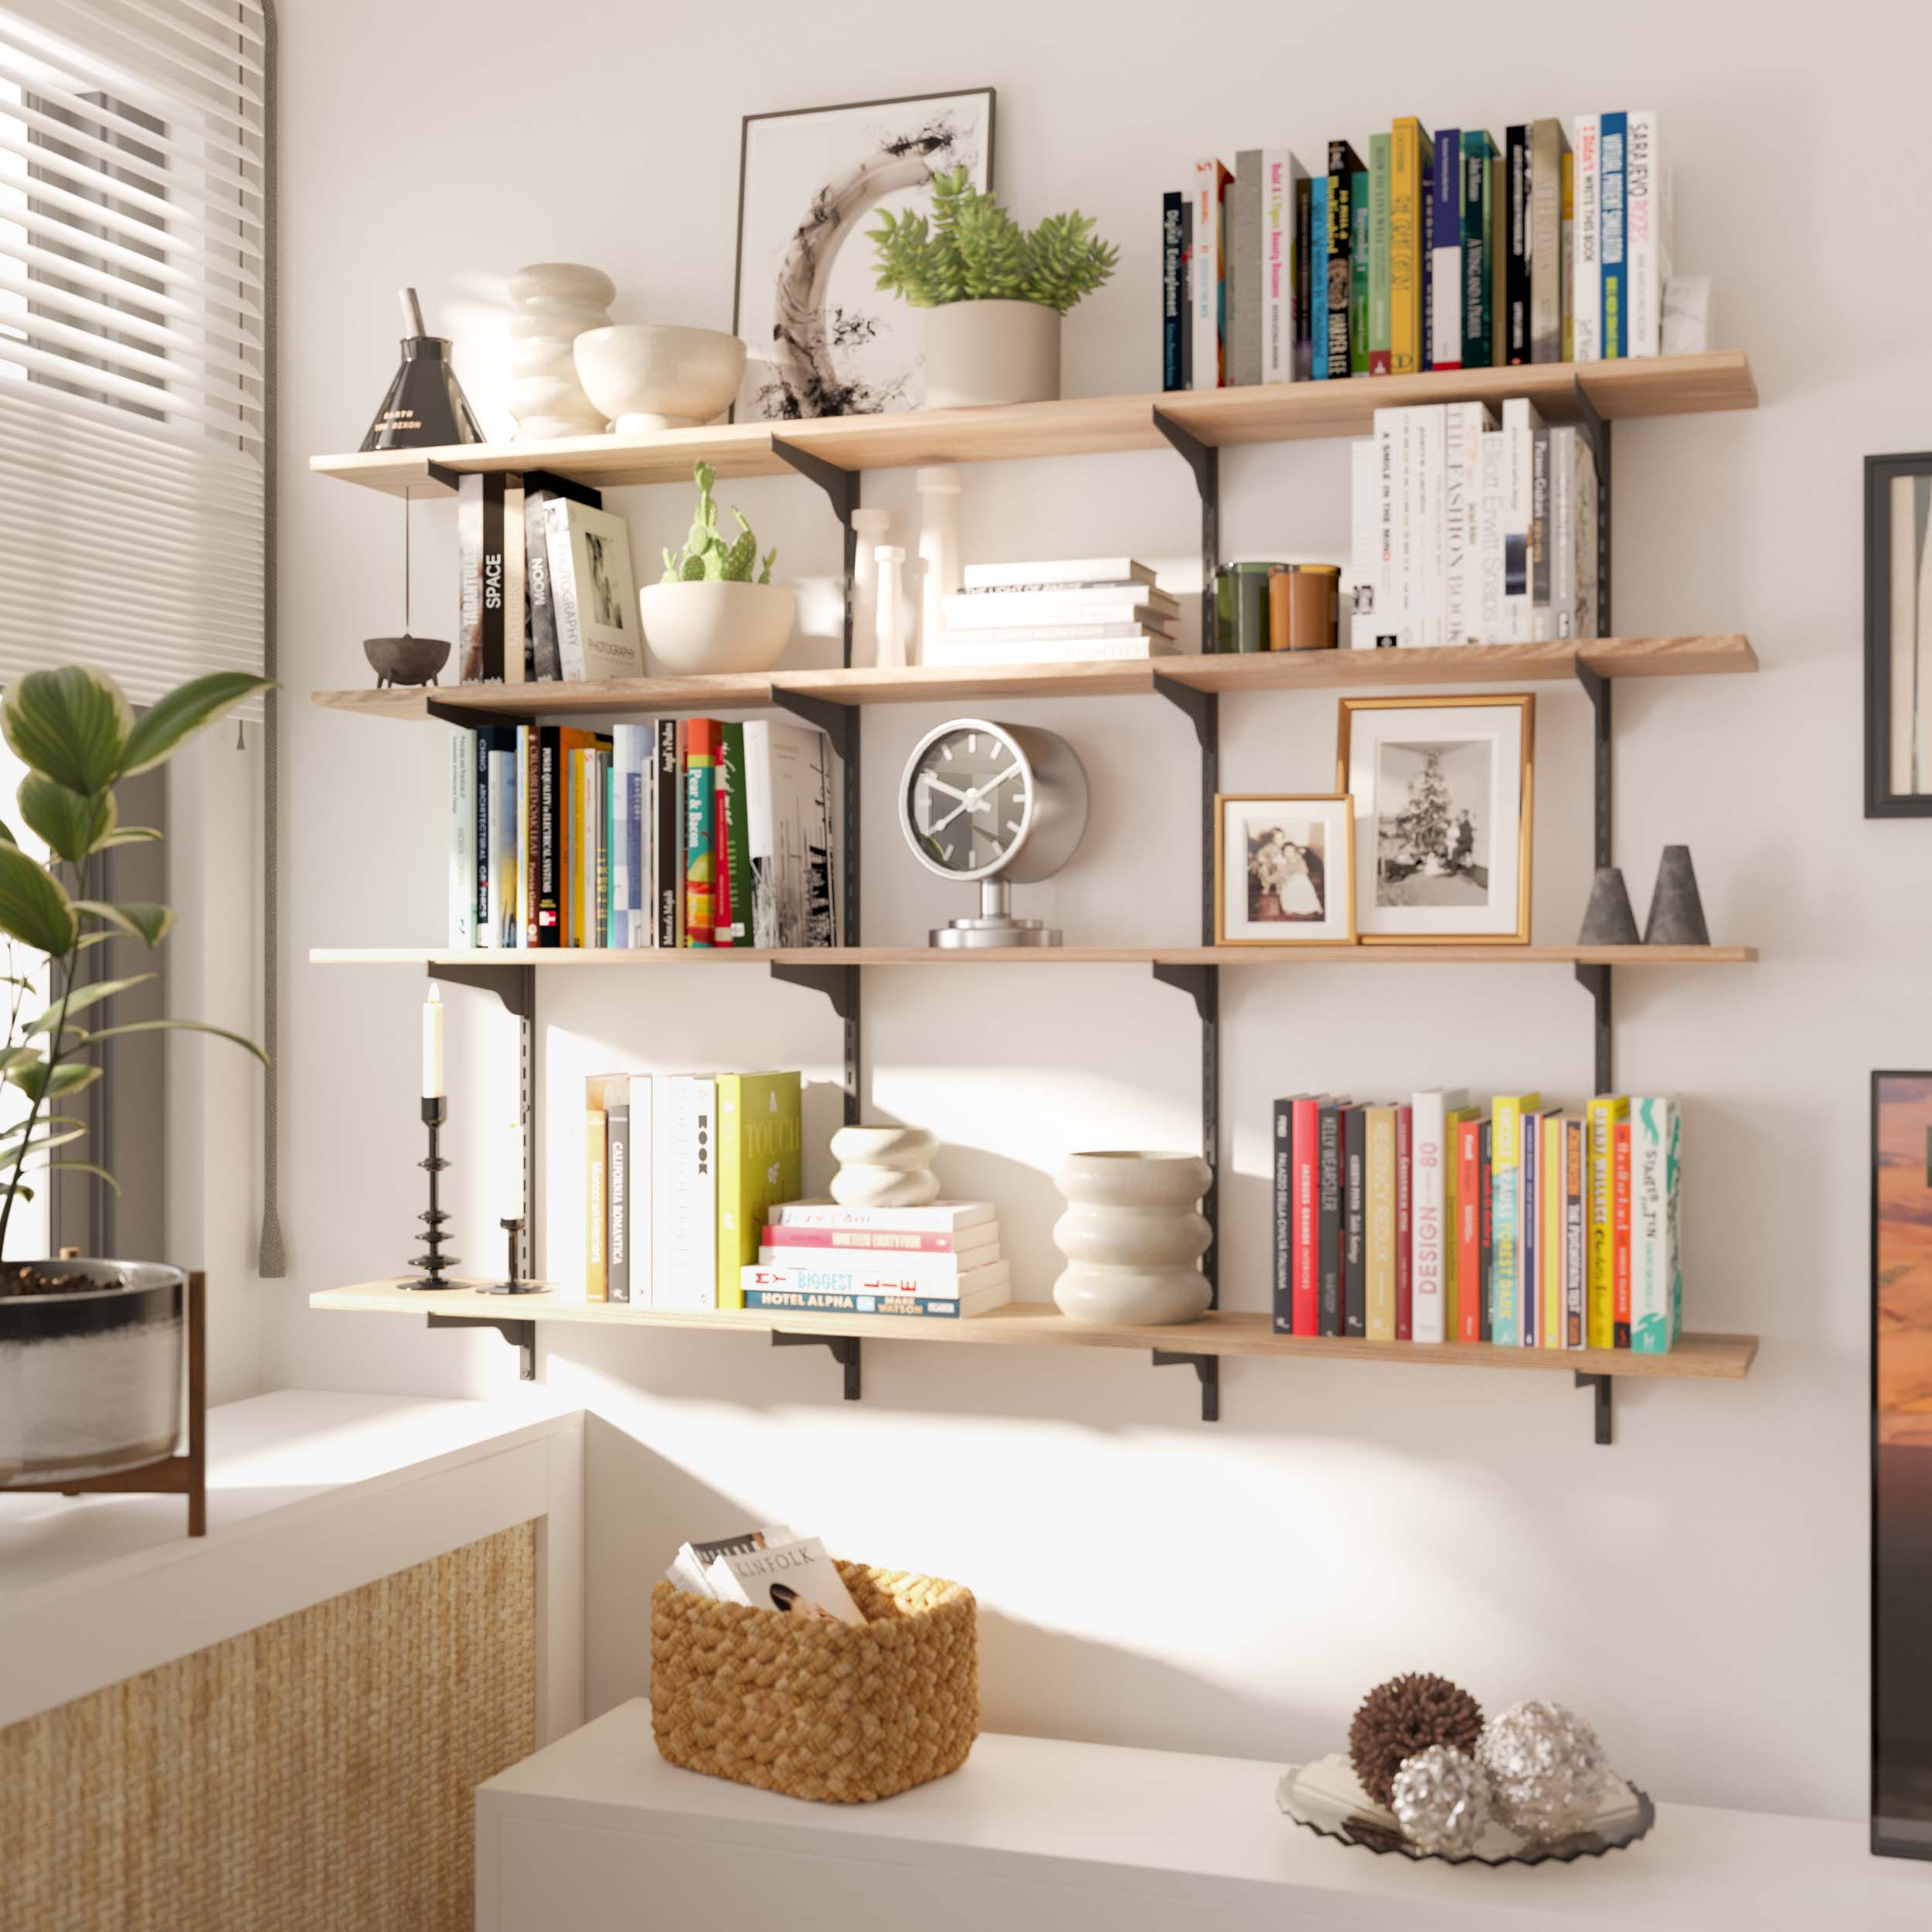 A modern shelf arrangement in a living space, featuring books, decor items, and plants, emphasizing minimalist design and natural elements.